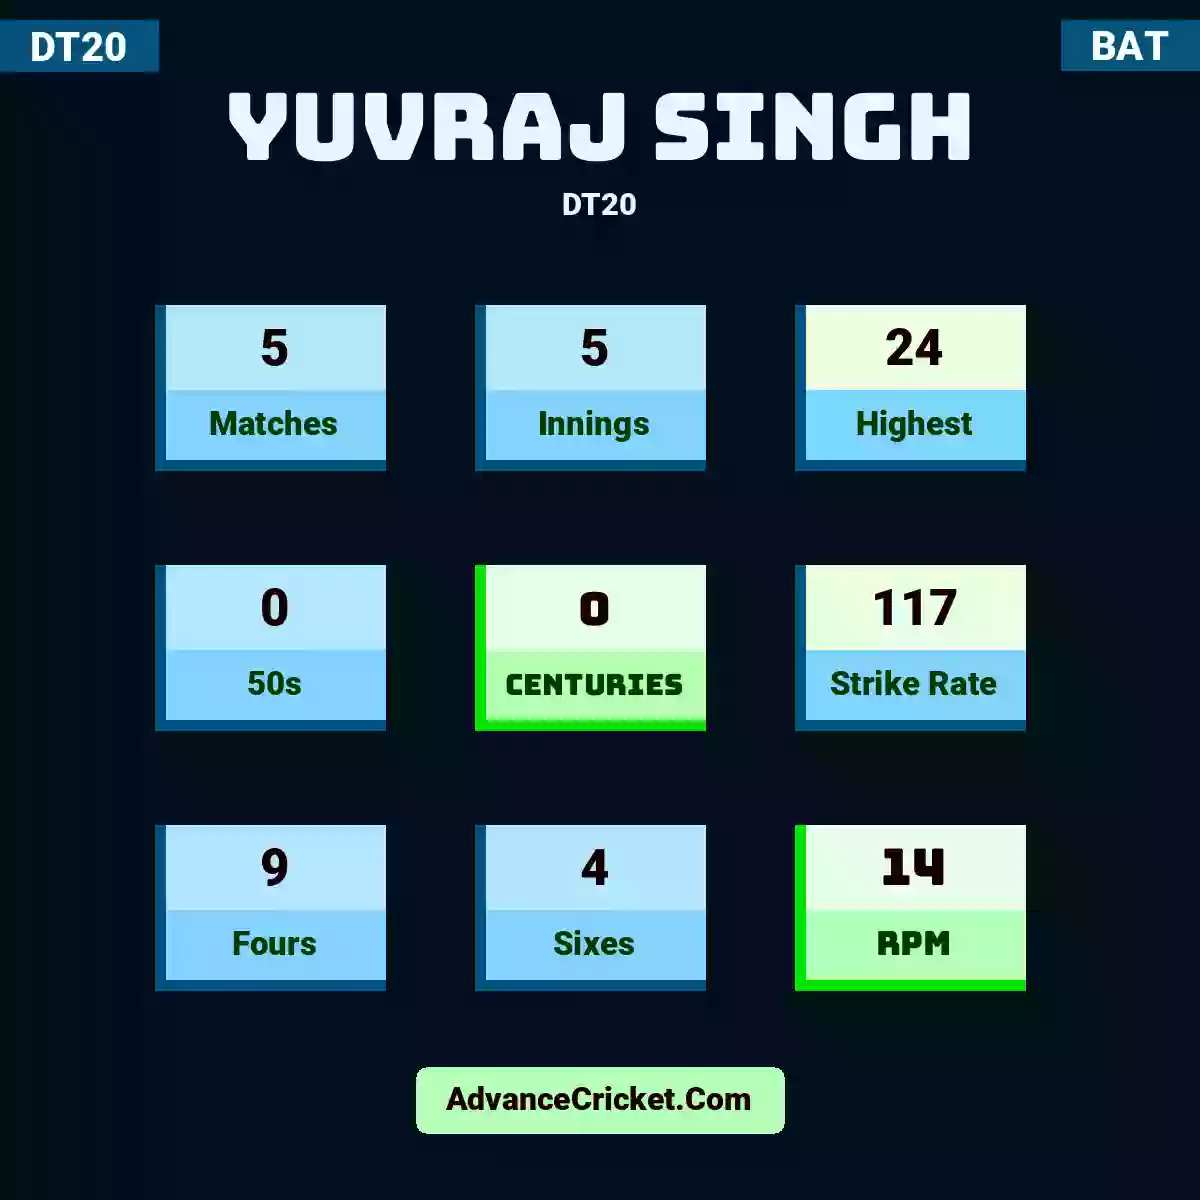 Yuvraj Singh DT20 , Yuvraj Singh played 5 matches, scored 24 runs as highest, 0 half-centuries, and 0 centuries, with a strike rate of 117. Y.Singh hit 9 fours and 4 sixes, with an RPM of 14.